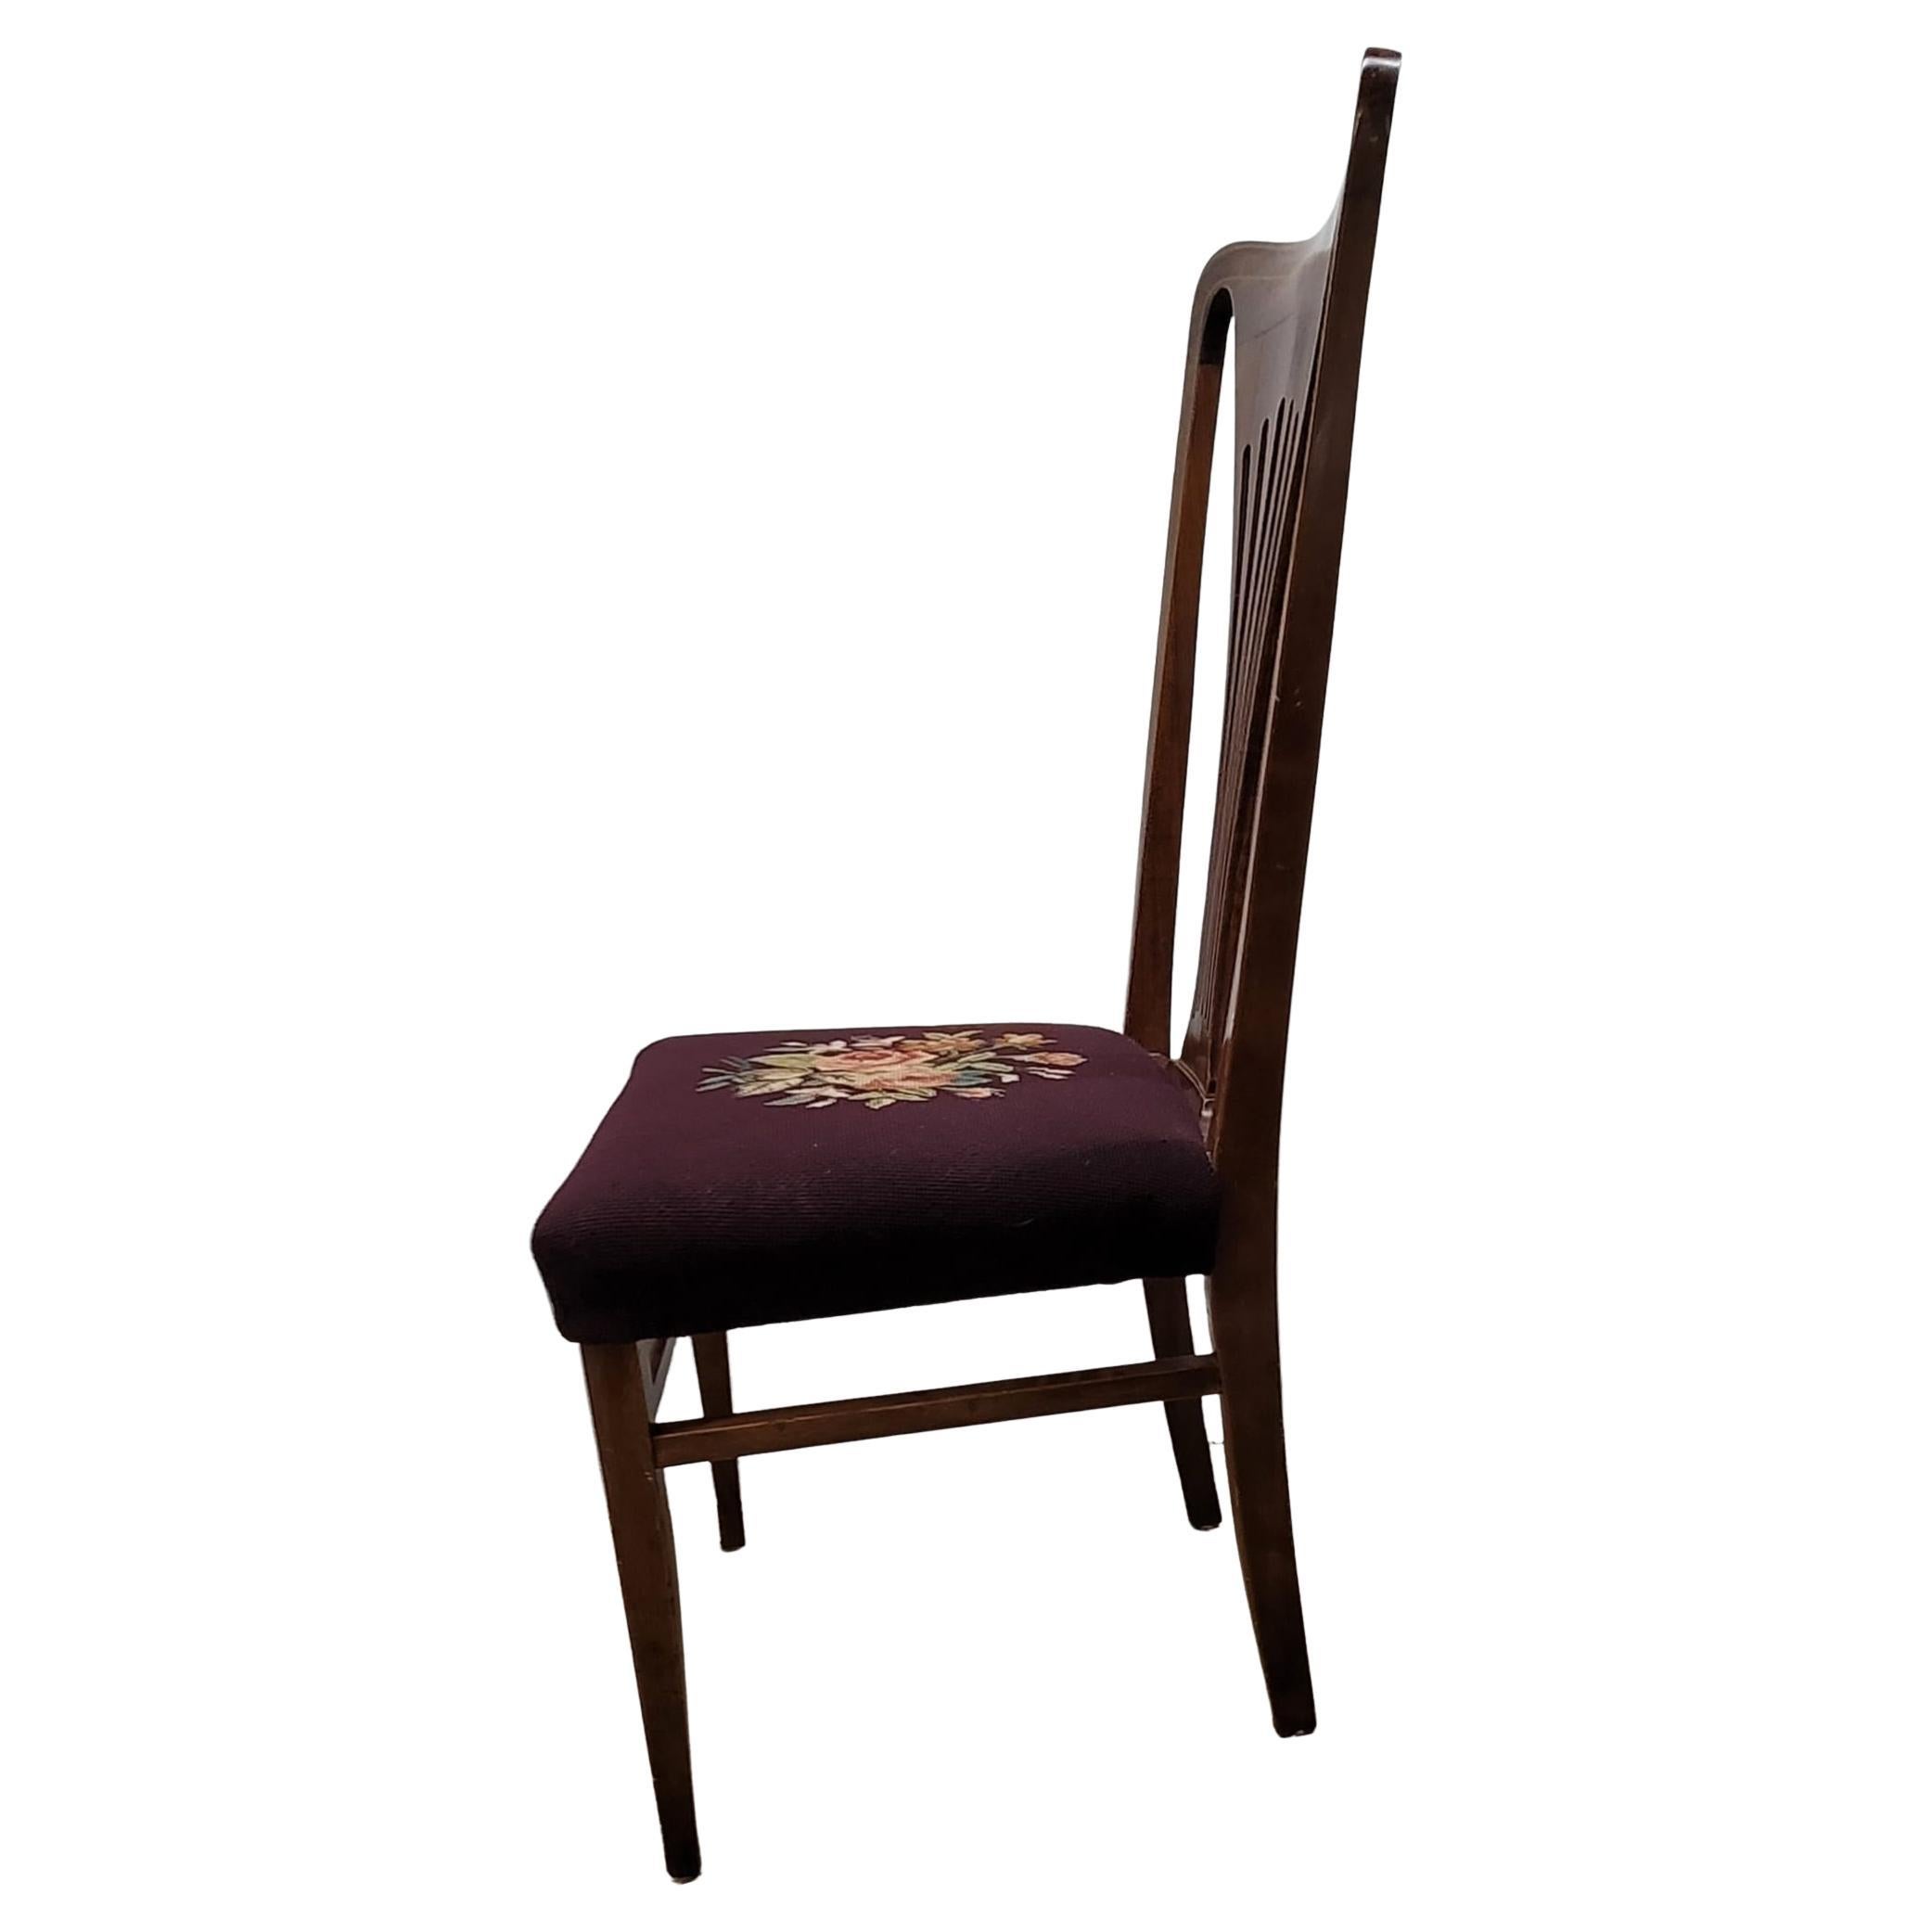 20th Century Vintage American Mahogany and Inlay Needlepoint Upholstered Chair For Sale